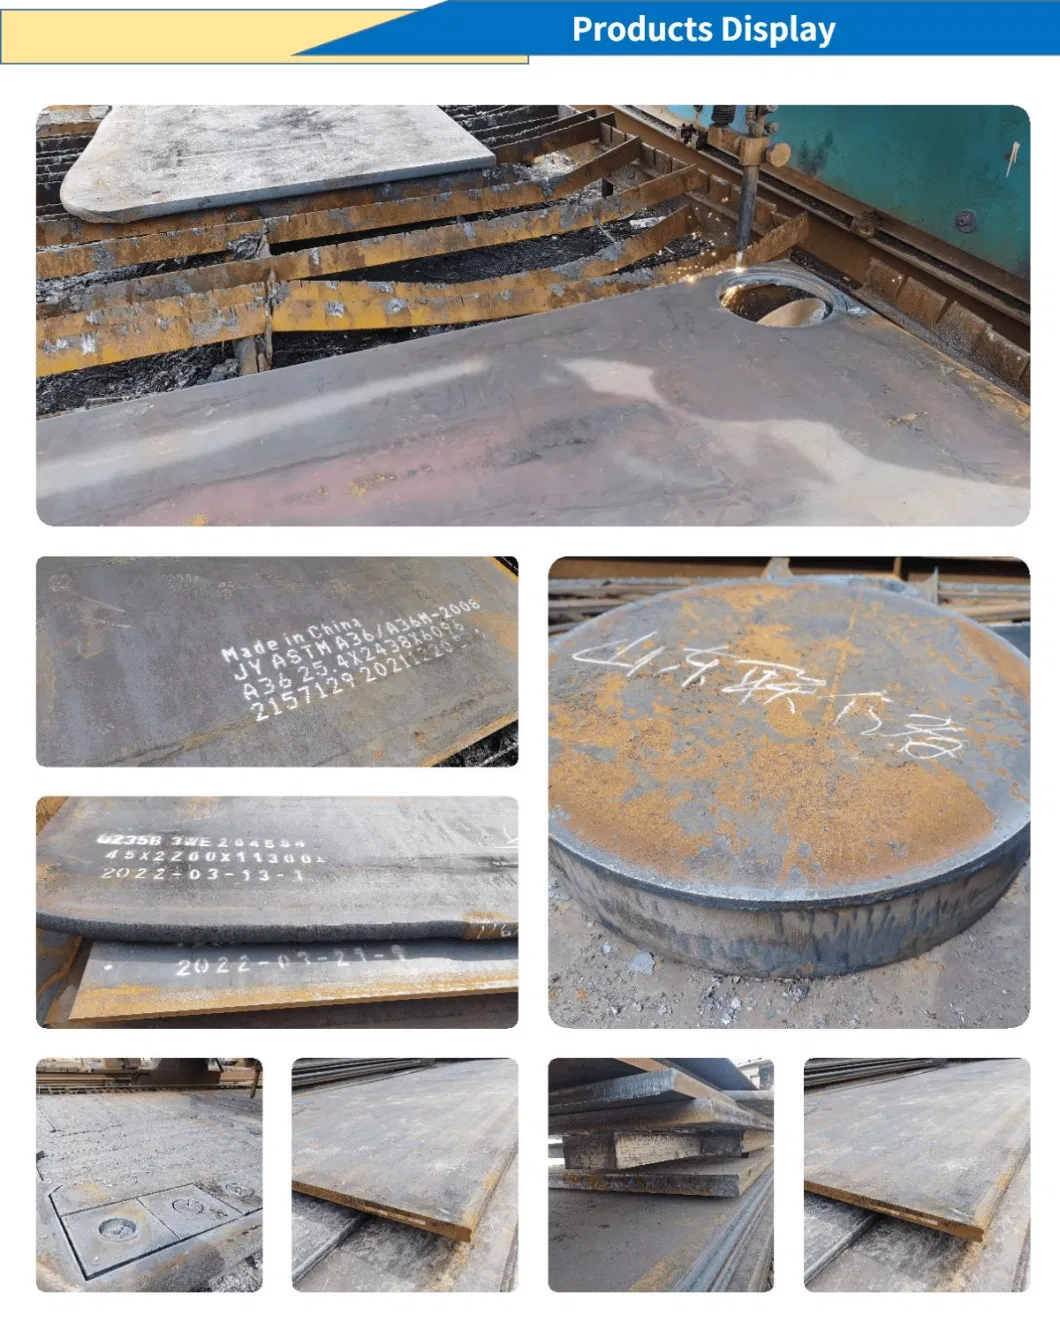 Wnm400 Wnm450 Wnm500 Wear Resistant Steel Plate Small Part Suplly